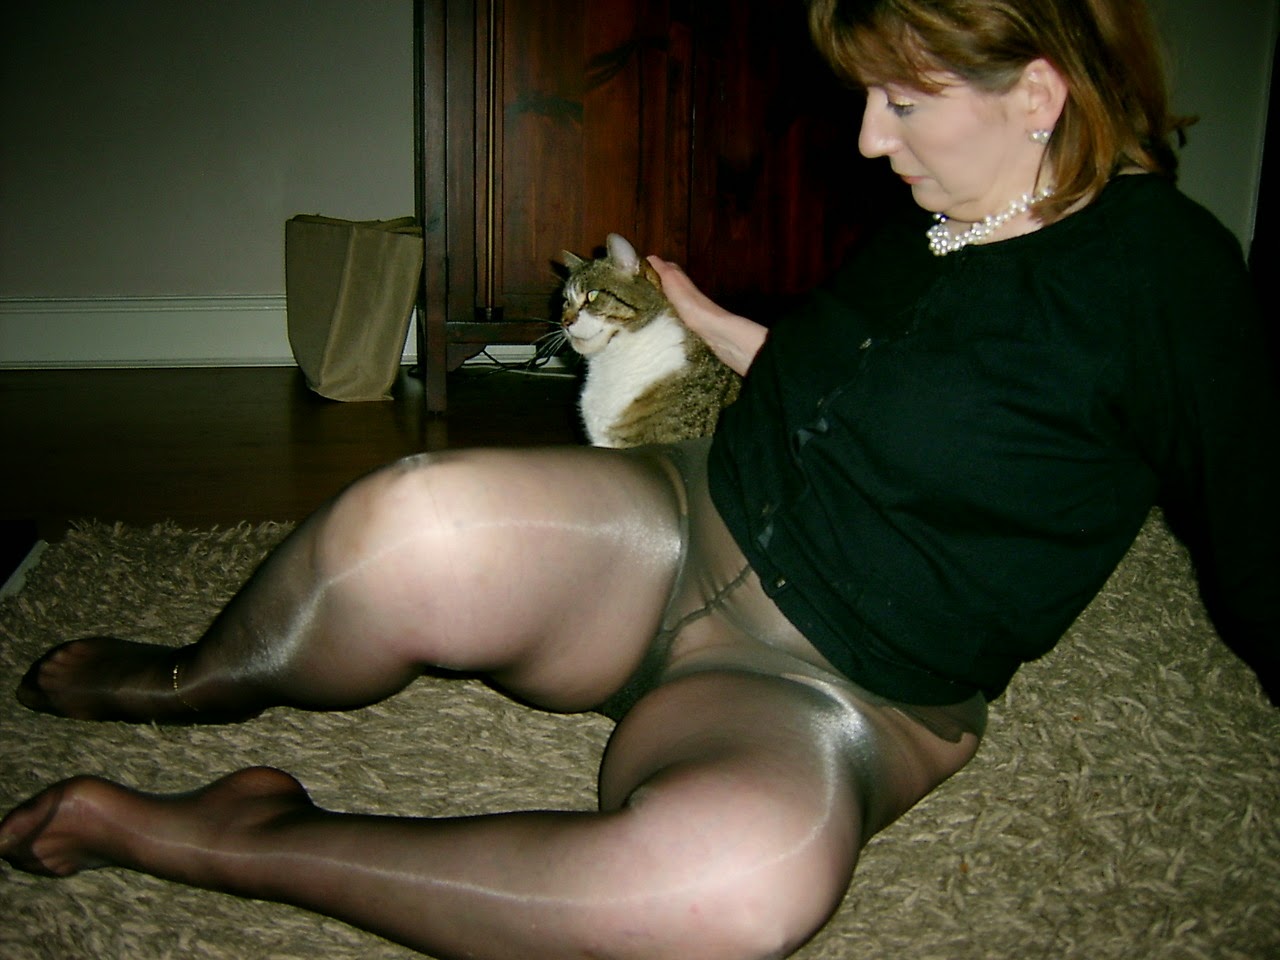 Milf in nylons wanting cock